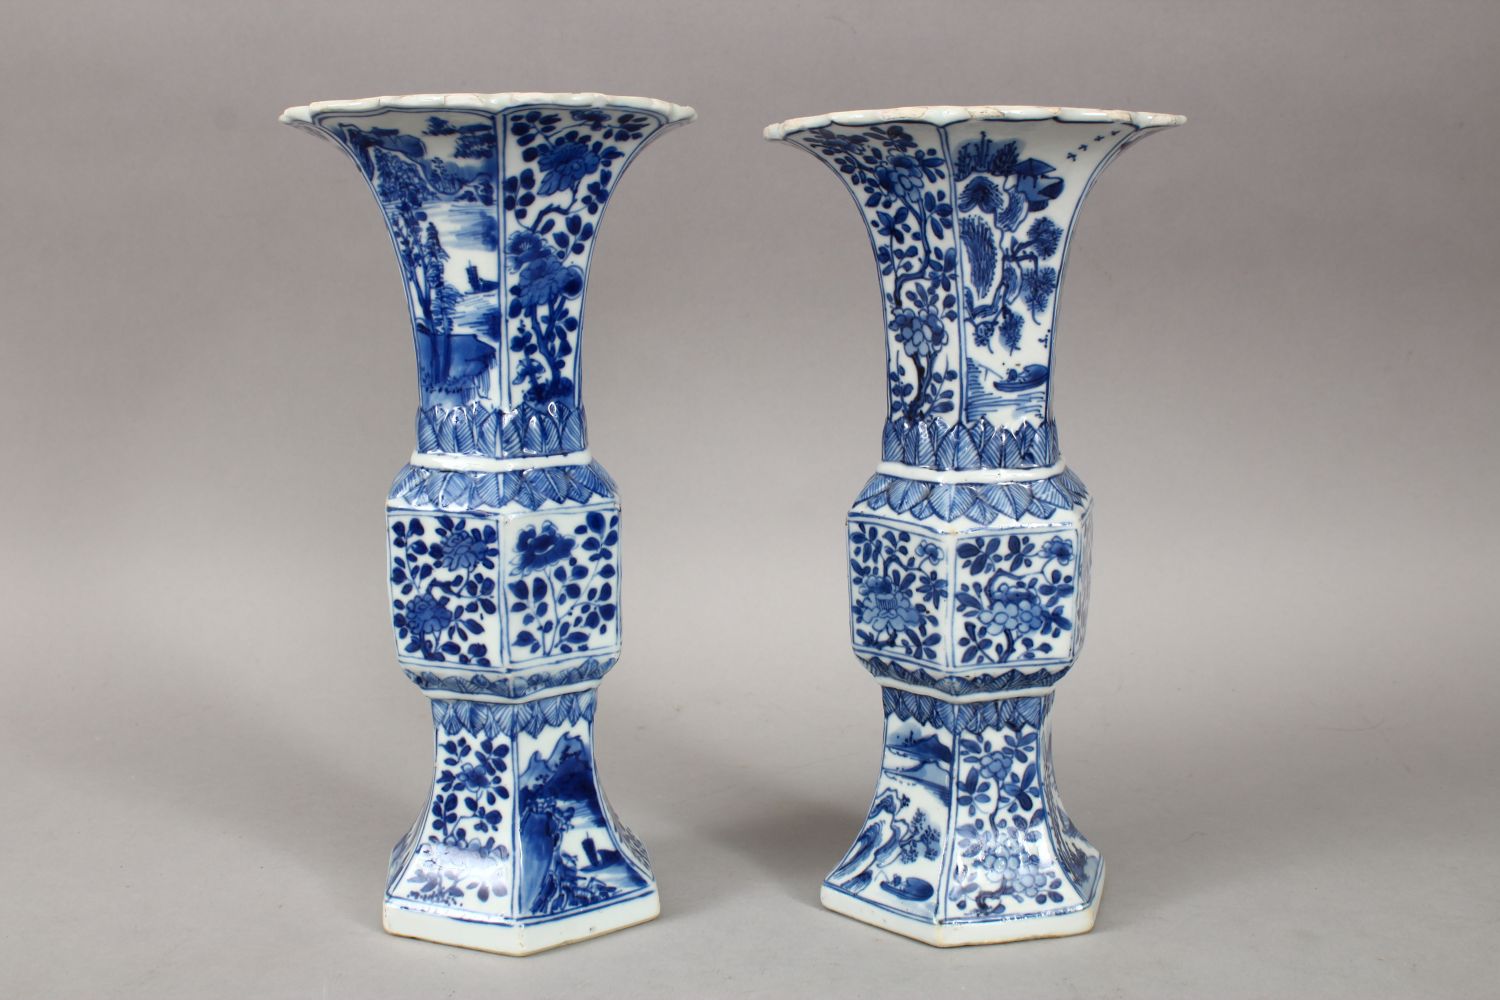 A GOOD PAIR OF 18TH CENTURY CHINESE KANGXI BLUE & WHITE GU SHAPE PORCELAIN VASES, with a multitude - Image 2 of 10